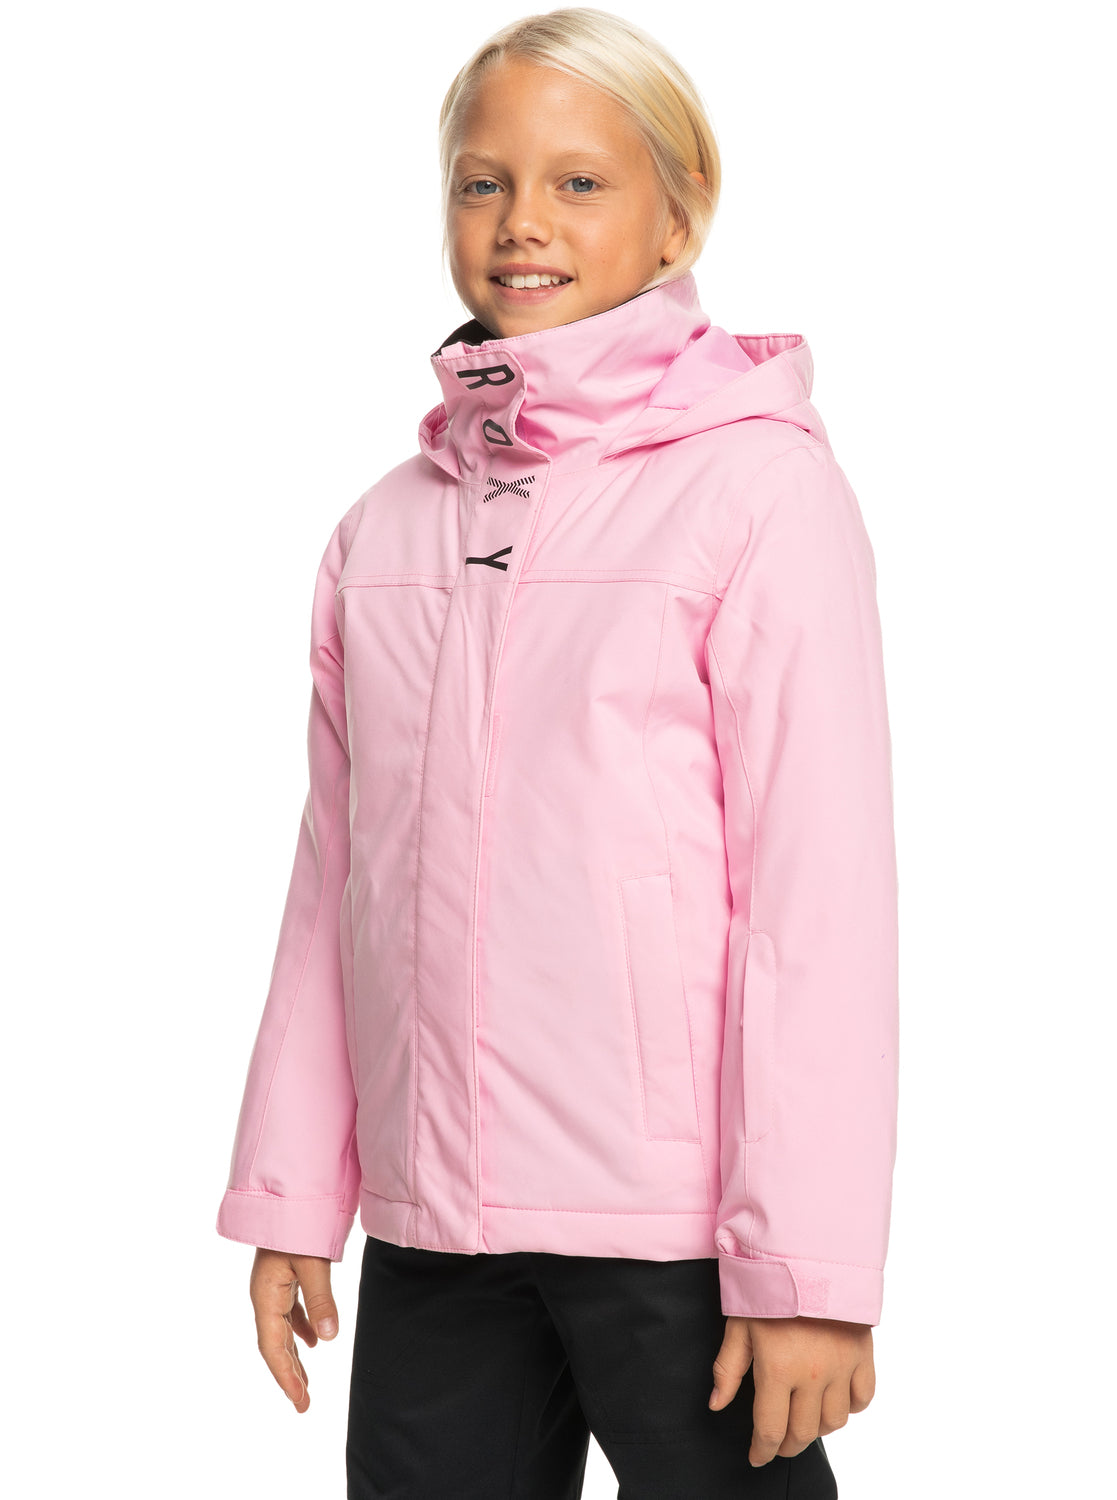 Girls 4-16 Galaxy Technical Snow Jacket - Pink Frosting